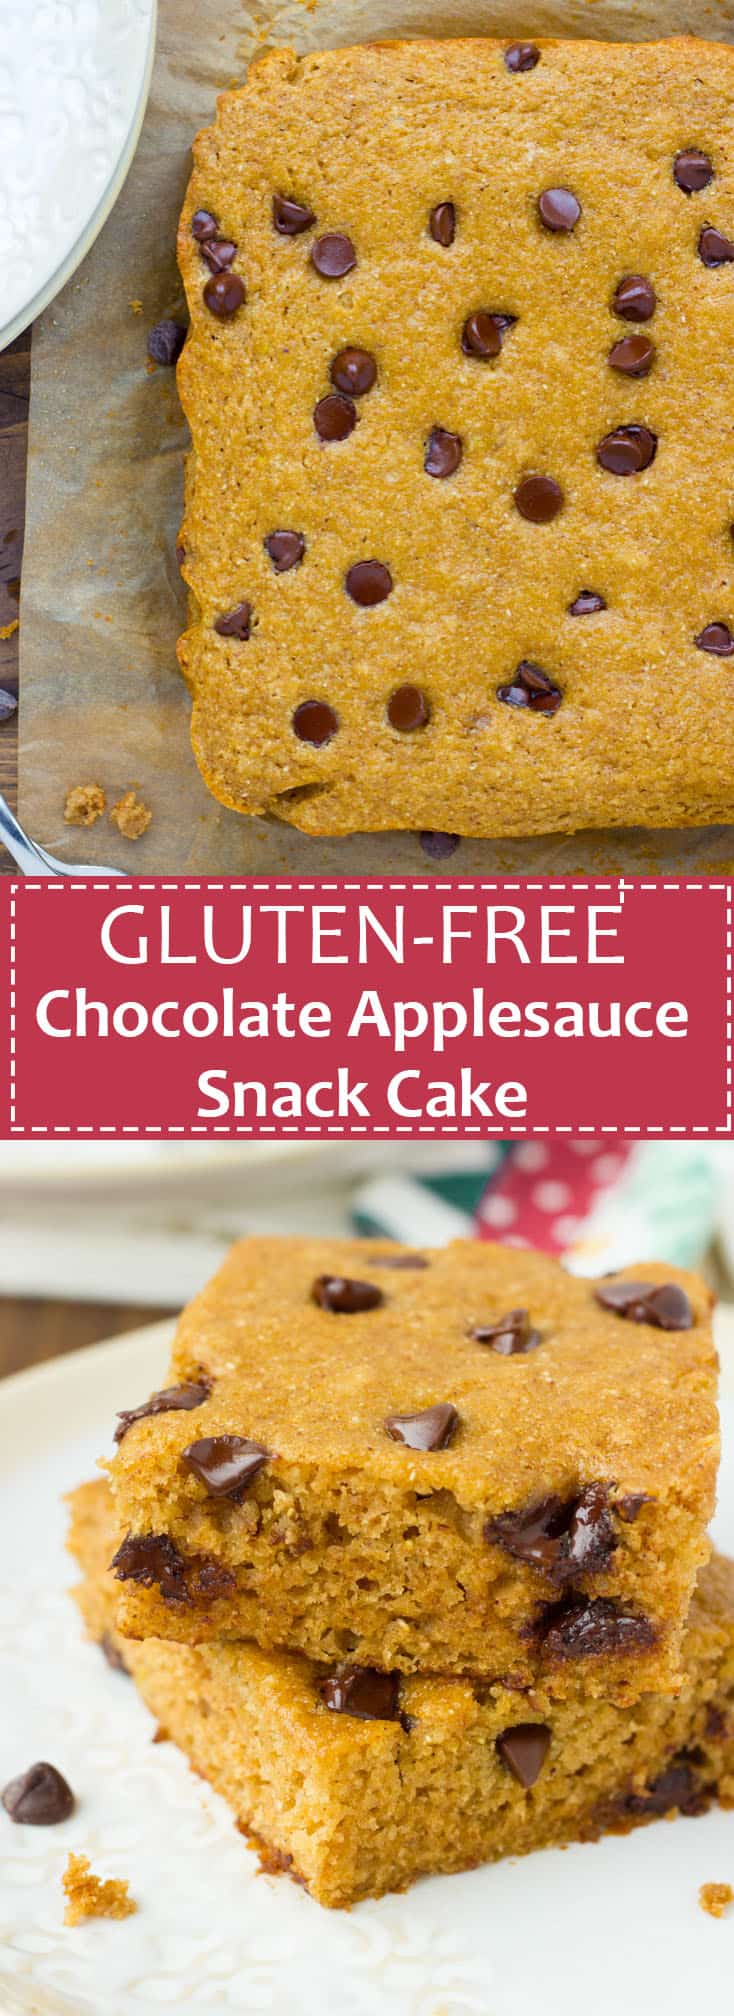 Gluten-Free Chocolate Applesauce Snack Cake! Lightly sweet, spiced cake made with a wholesome grain-free flour blend. {Dairy-Free}